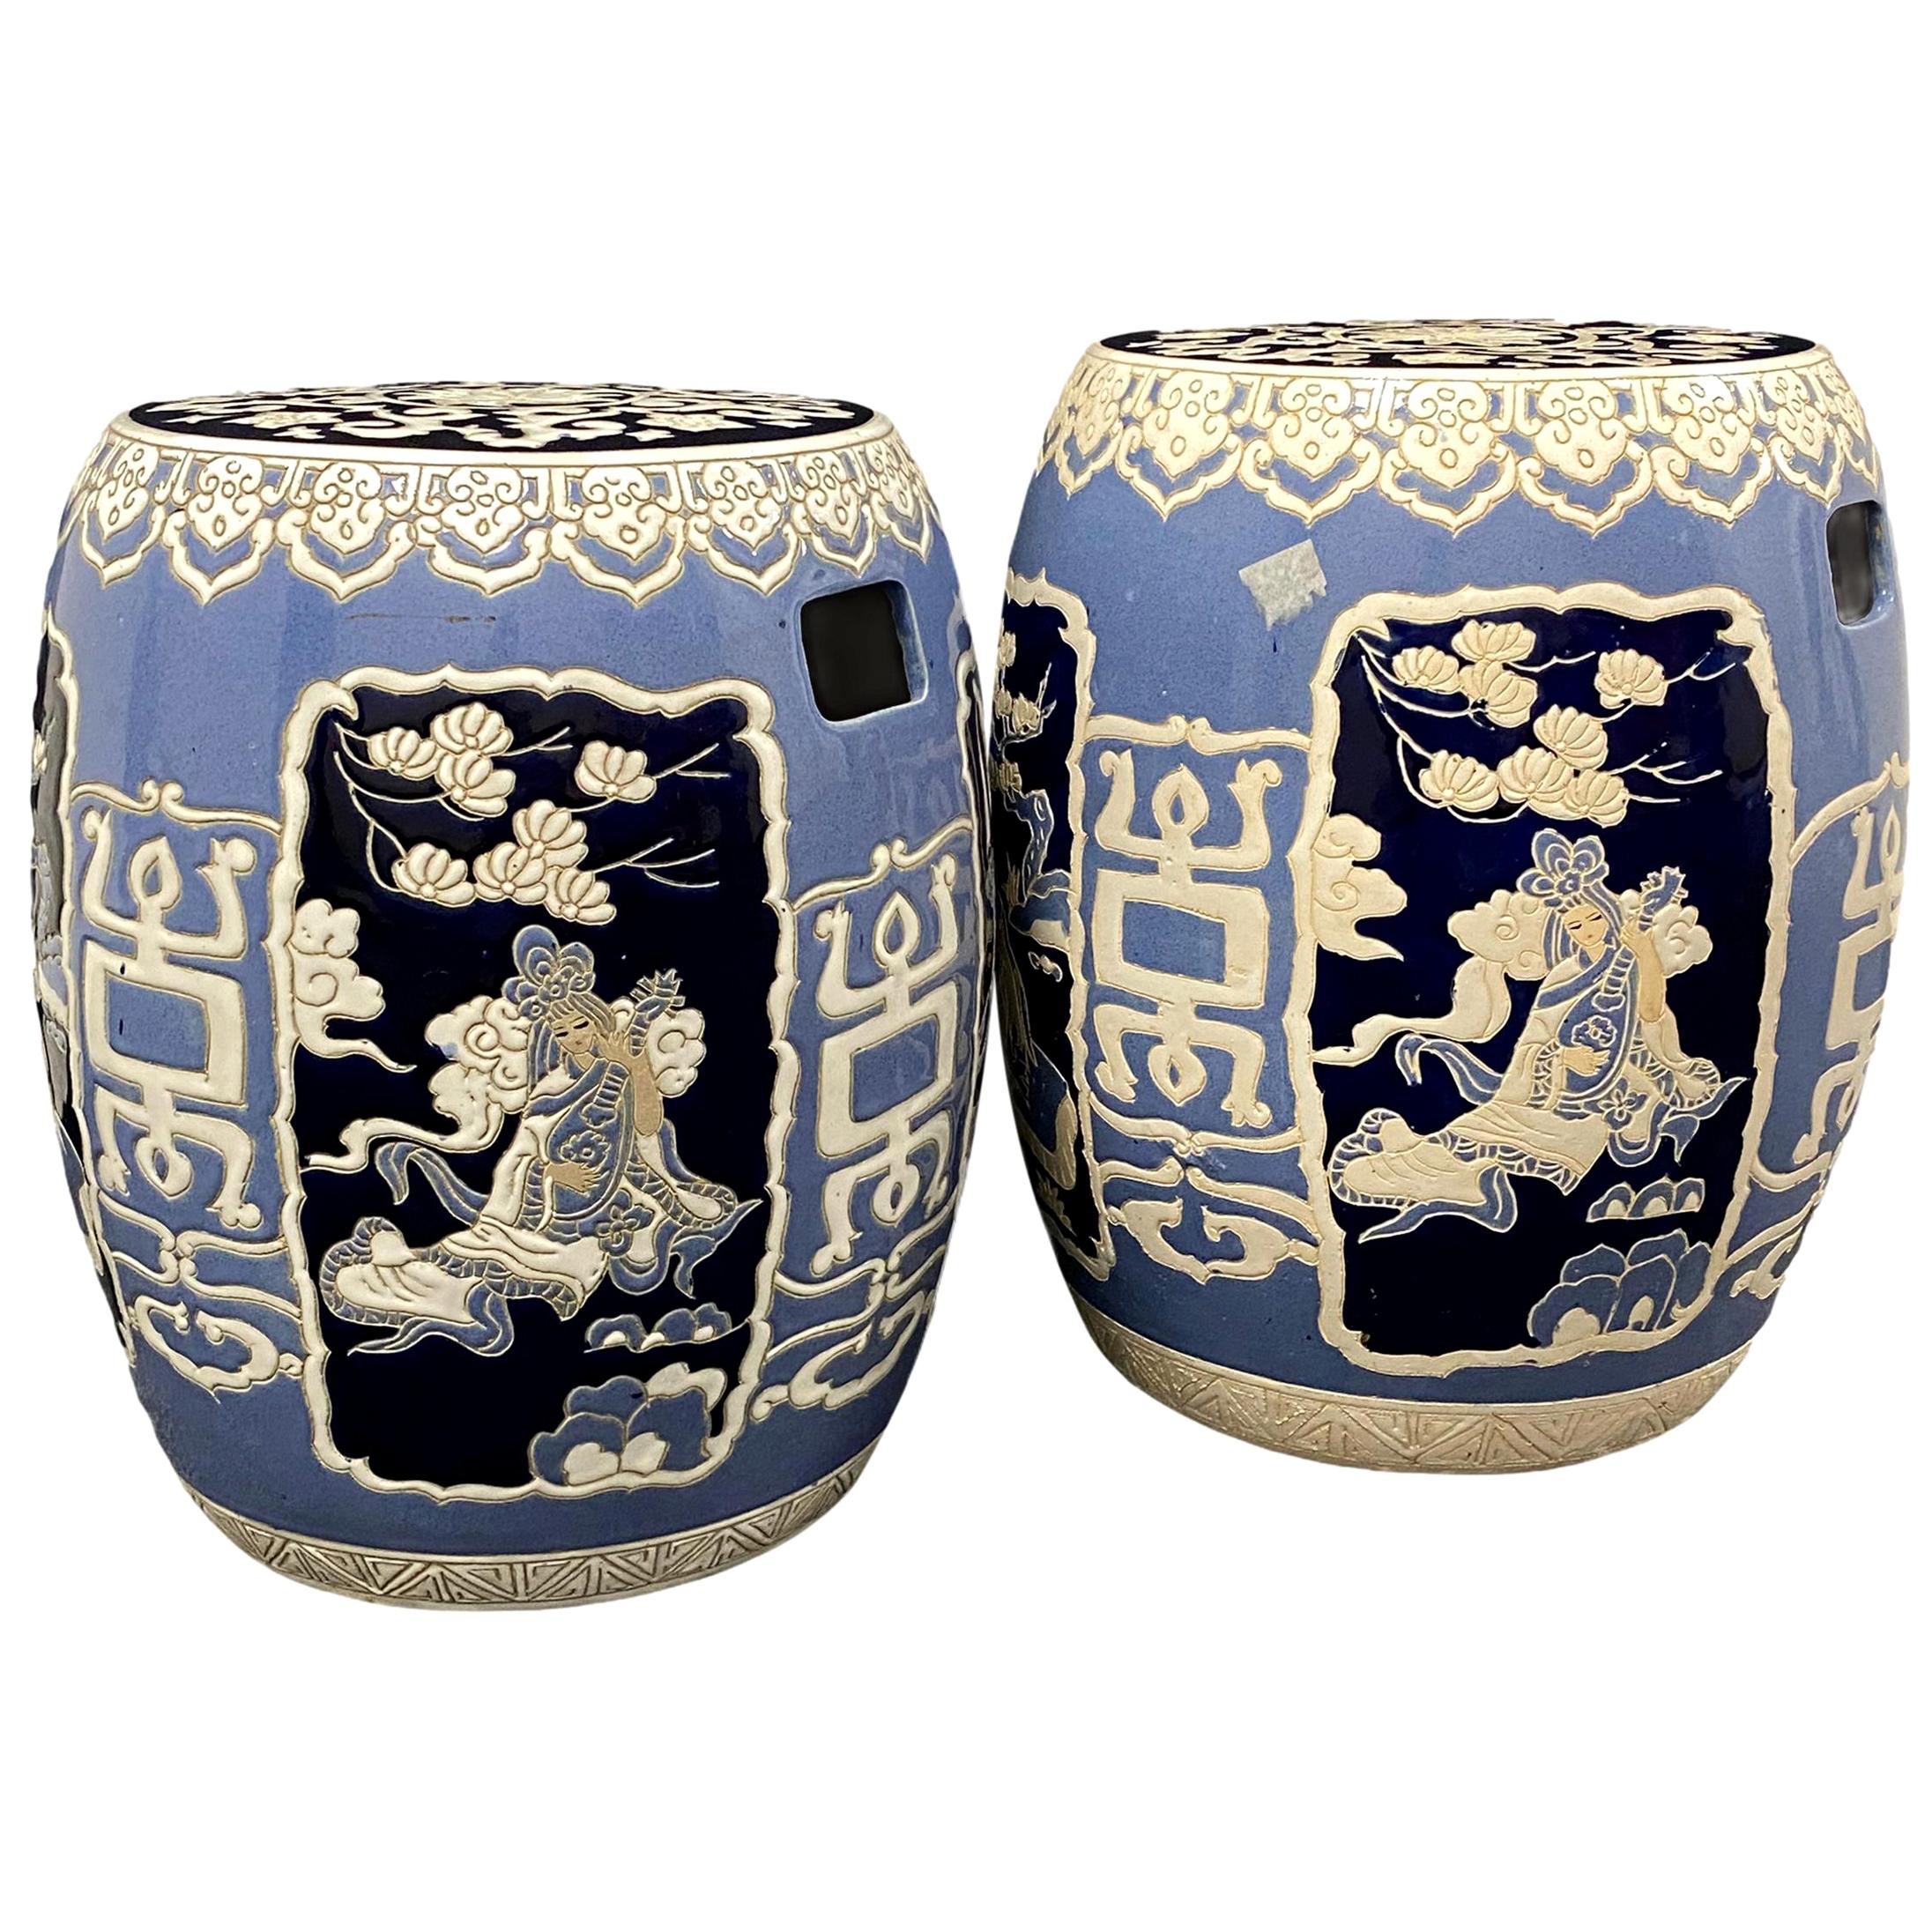 Pair of Mid-20th Century Chinoiserie Blue and White Garden Stool Flower Pot Seat